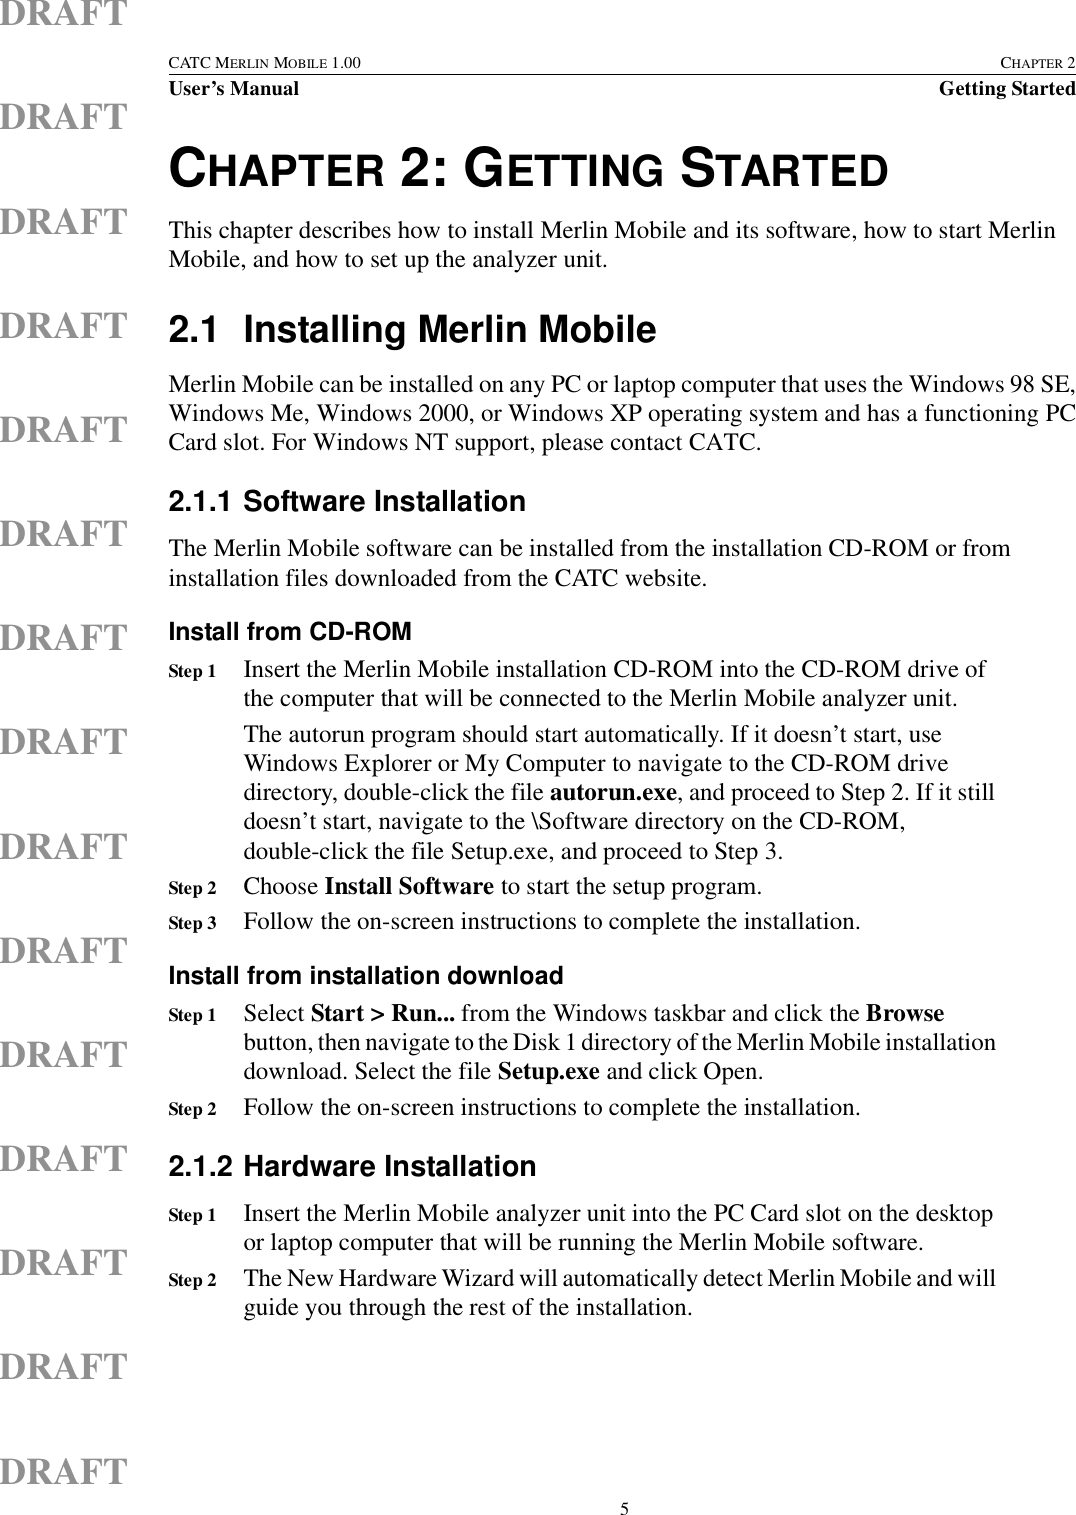  5CATC MERLIN MOBILE 1.00 CHAPTER 2User’s Manual Getting StartedDRAFTDRAFTDRAFTDRAFTDRAFTDRAFTDRAFTDRAFTDRAFTDRAFTDRAFTDRAFTDRAFTDRAFTDRAFTCHAPTER 2: GETTING STARTEDThis chapter describes how to install Merlin Mobile and its software, how to start Merlin Mobile, and how to set up the analyzer unit. 2.1 Installing Merlin MobileMerlin Mobile can be installed on any PC or laptop computer that uses the Windows 98 SE,Windows Me, Windows 2000, or Windows XP operating system and has a functioning PCCard slot. For Windows NT support, please contact CATC.2.1.1 Software InstallationThe Merlin Mobile software can be installed from the installation CD-ROM or from installation files downloaded from the CATC website.Install from CD-ROMStep 1 Insert the Merlin Mobile installation CD-ROM into the CD-ROM drive of the computer that will be connected to the Merlin Mobile analyzer unit.The autorun program should start automatically. If it doesn’t start, use Windows Explorer or My Computer to navigate to the CD-ROM drive directory, double-click the file autorun.exe, and proceed to Step 2. If it still doesn’t start, navigate to the \Software directory on the CD-ROM, double-click the file Setup.exe, and proceed to Step 3.Step 2 Choose Install Software to start the setup program.Step 3 Follow the on-screen instructions to complete the installation.Install from installation downloadStep 1 Select Start &gt; Run... from the Windows taskbar and click the Browse button, then navigate to the Disk 1 directory of the Merlin Mobile installation download. Select the file Setup.exe and click Open.Step 2 Follow the on-screen instructions to complete the installation.2.1.2 Hardware InstallationStep 1 Insert the Merlin Mobile analyzer unit into the PC Card slot on the desktop or laptop computer that will be running the Merlin Mobile software.Step 2 The New Hardware Wizard will automatically detect Merlin Mobile and will guide you through the rest of the installation.